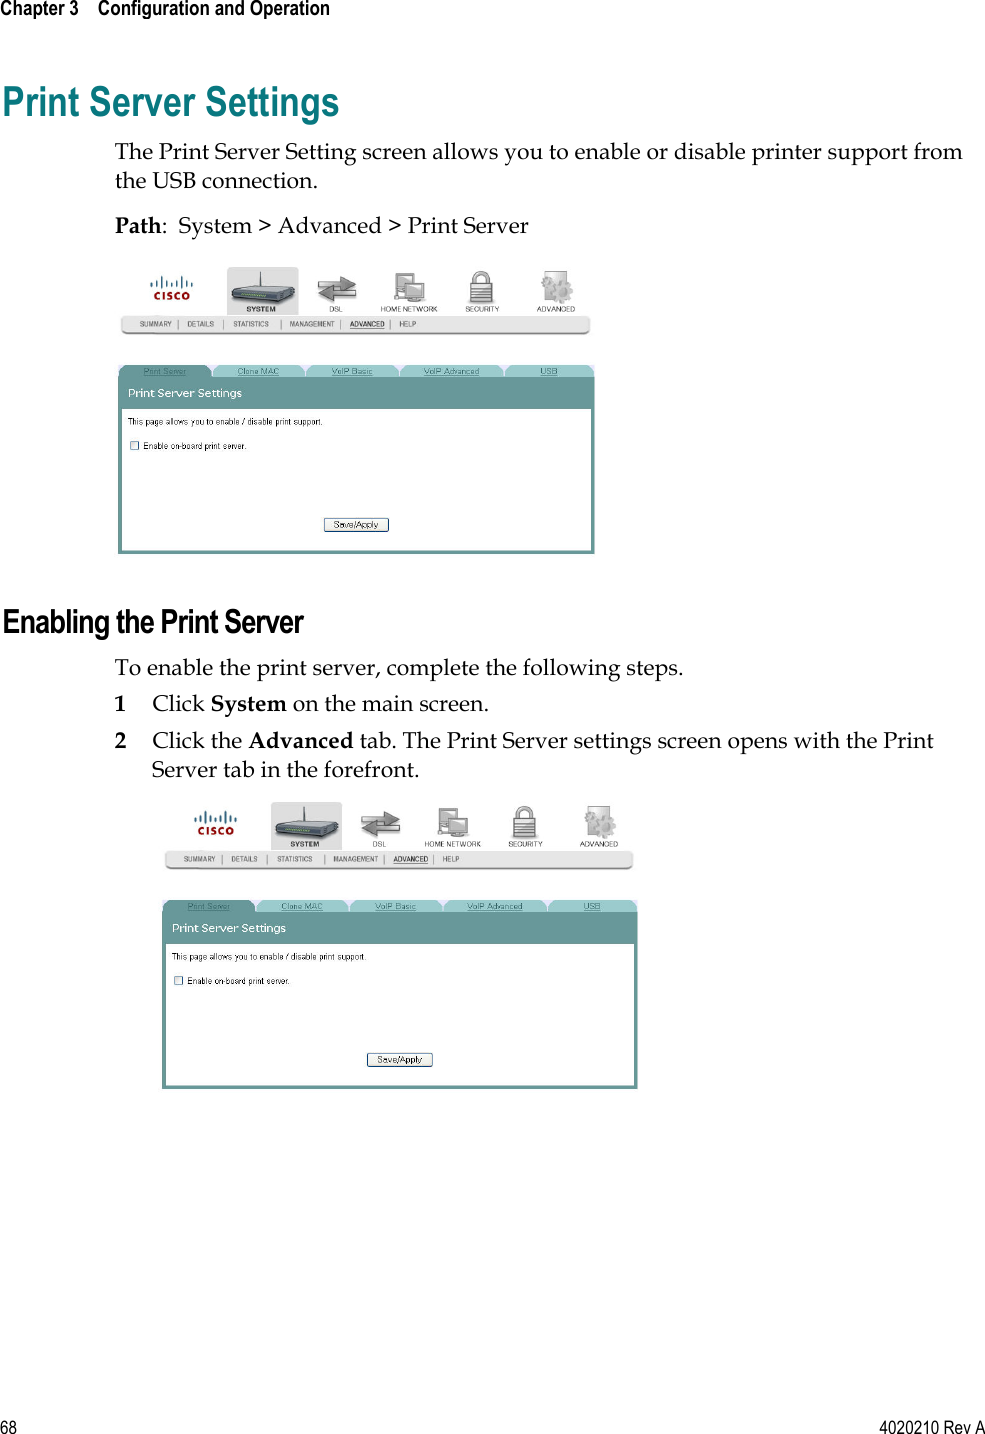  Chapter 3    Configuration and Operation   68  4020210 Rev A Print Server Settings The Print Server Setting screen allows you to enable or disable printer support from the USB connection.  Path:  System &gt; Advanced &gt; Print Server   Enabling the Print Server To enable the print server, complete the following steps. 1 Click System on the main screen.  2 Click the Advanced tab. The Print Server settings screen opens with the Print Server tab in the forefront.   